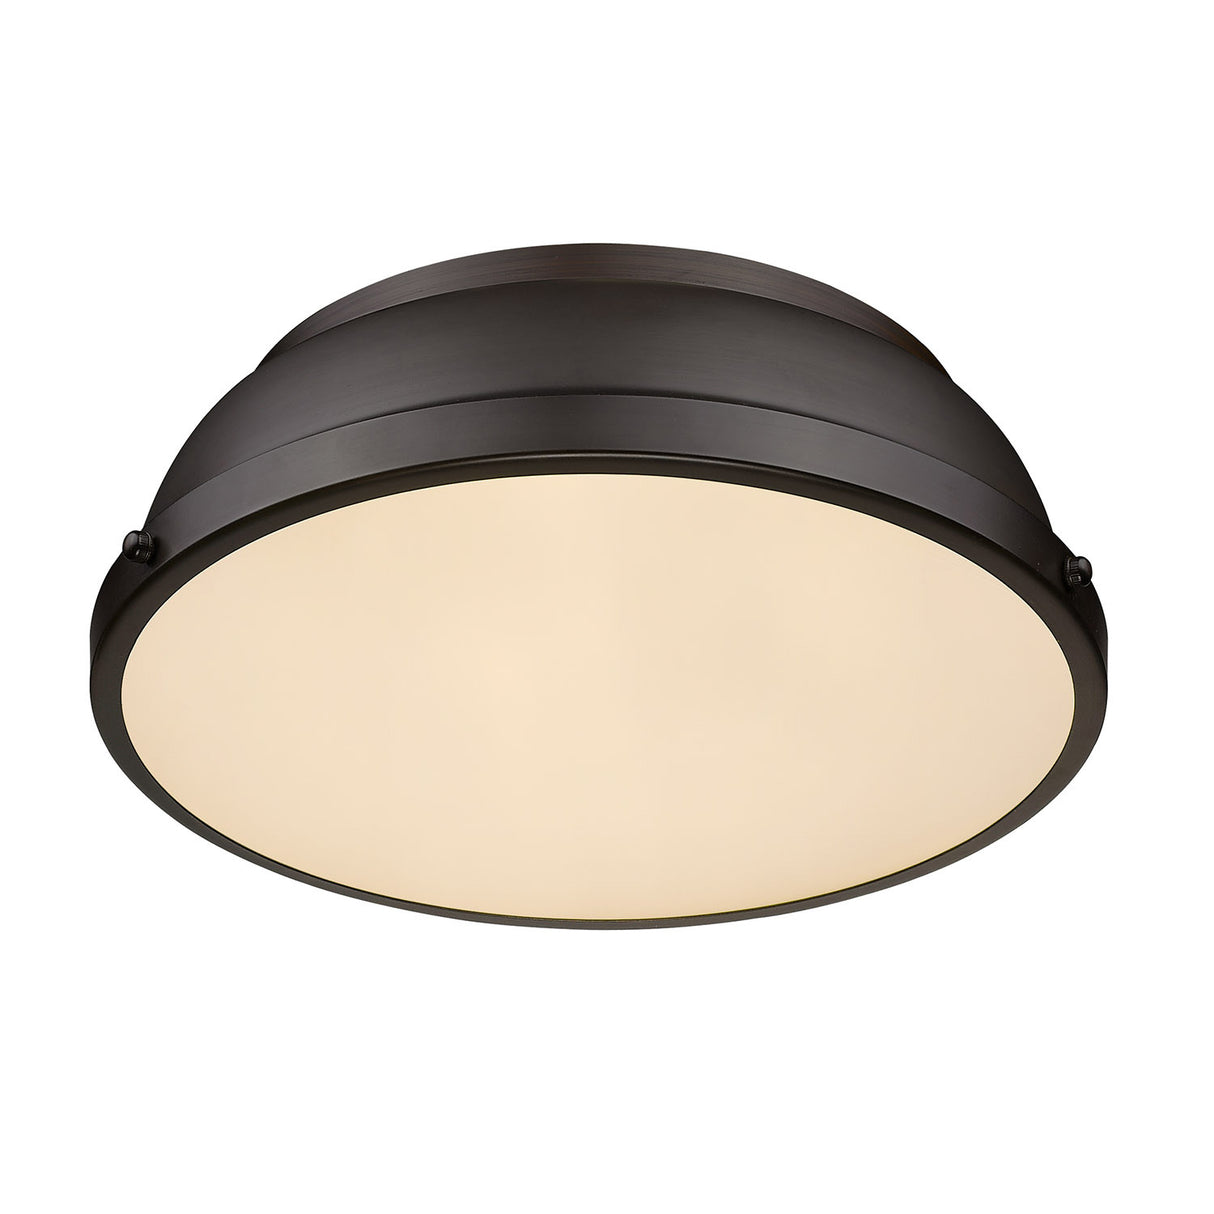 Duncan 14" Flush Mount in Rubbed Bronze with a Rubbed Bronze Shade